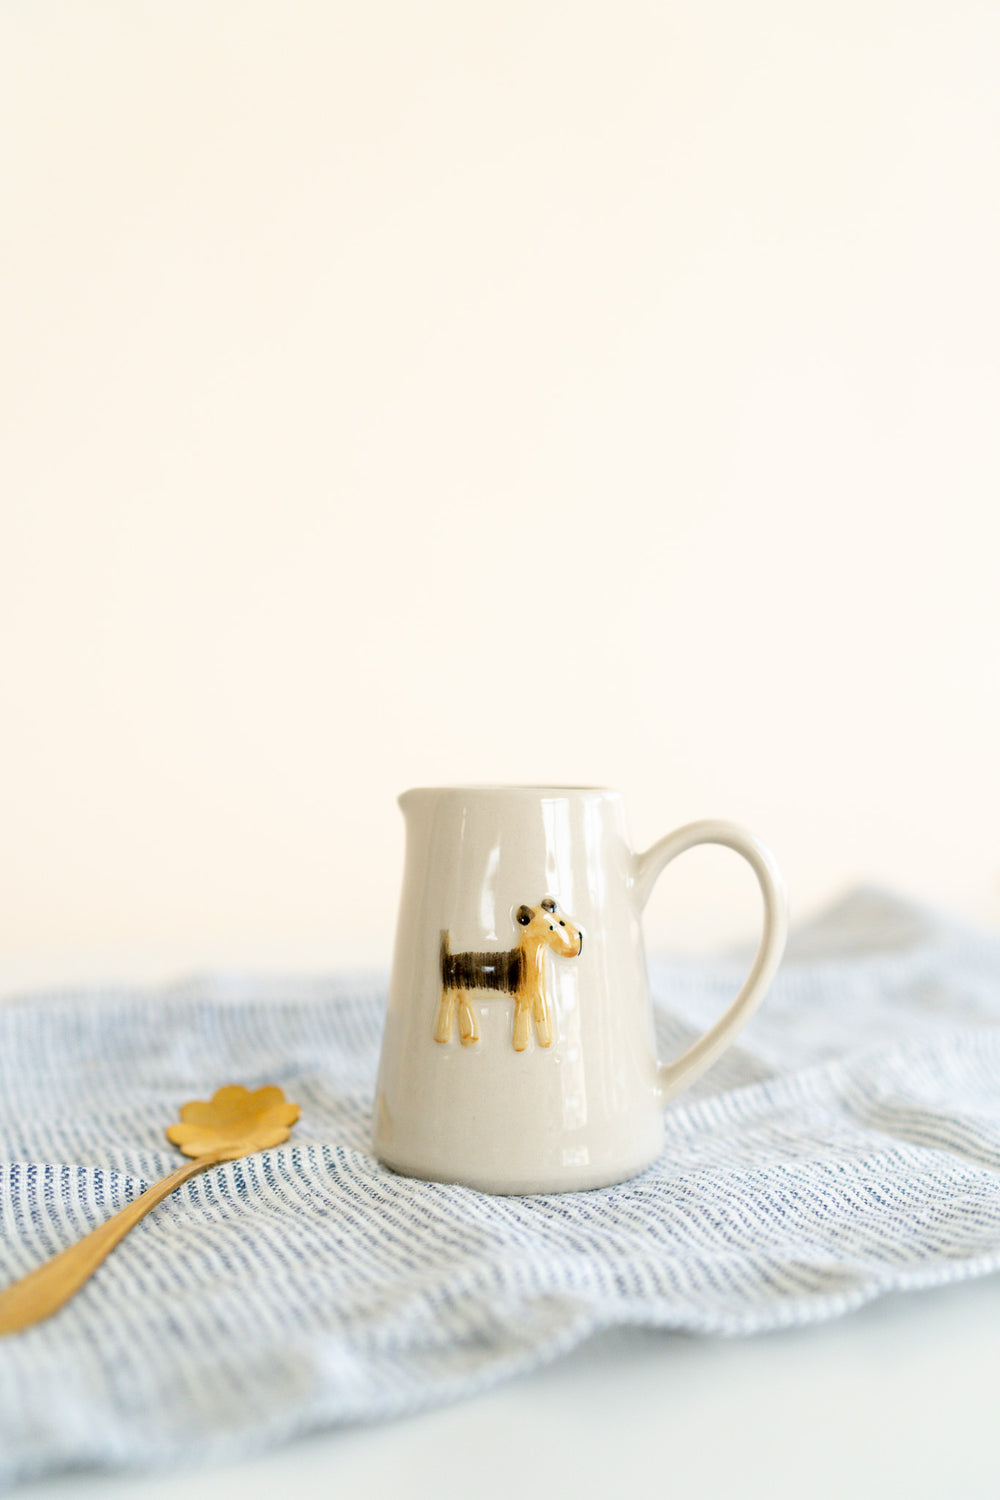 Dog Mini Creamer Pitcher - A petite pitcher with a painted brown dog sits on a striped towel next to a gold spoon